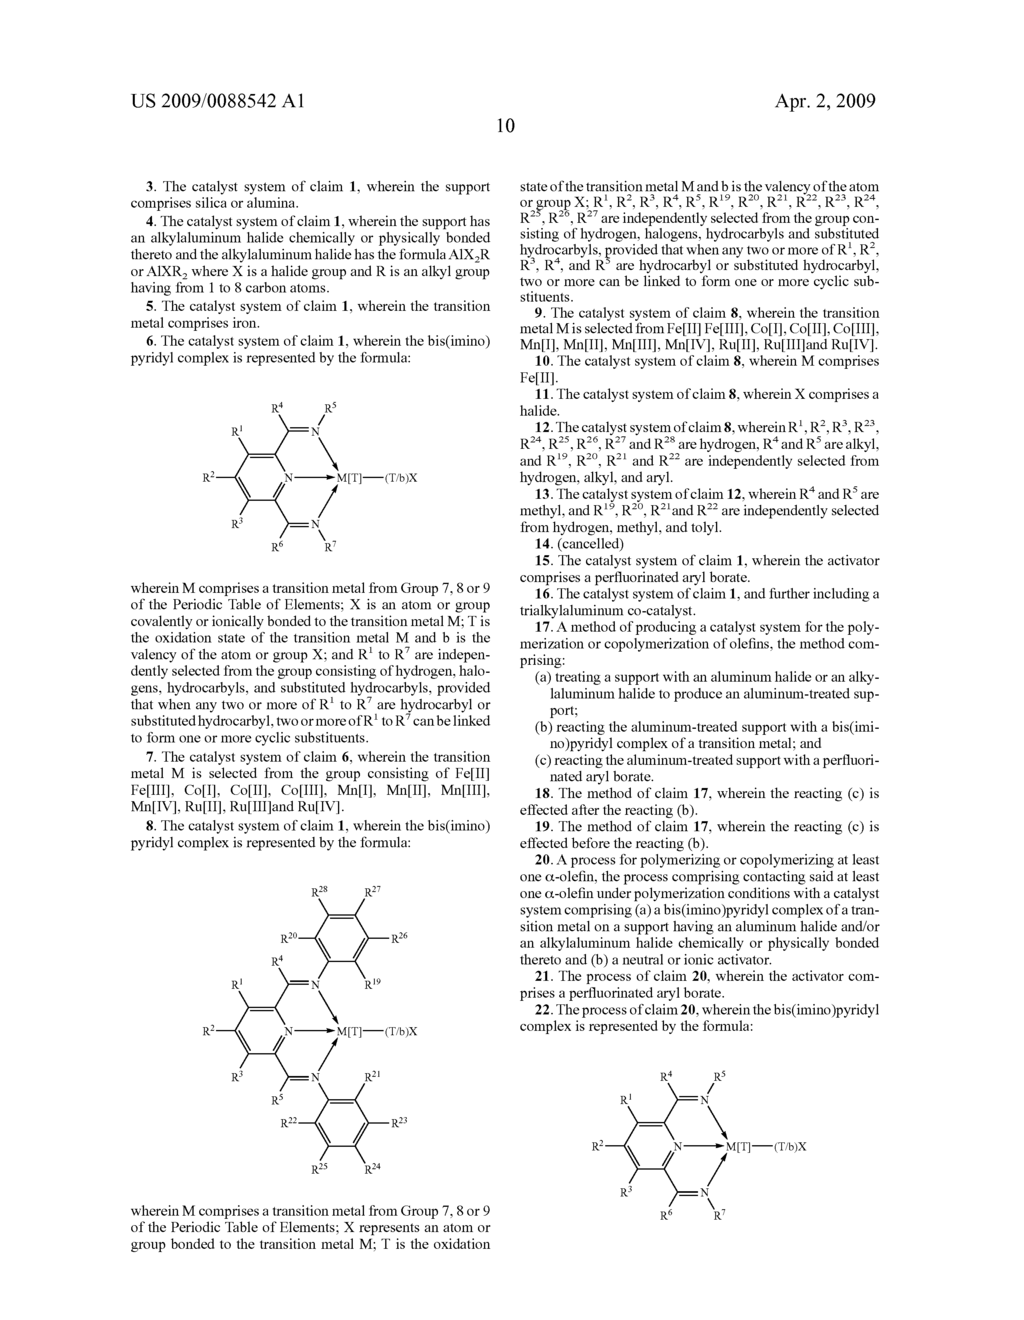 OLEFIN POLYMERIZATION CATALYSTS, THEIR SYNTHESIS AND USE - diagram, schematic, and image 11